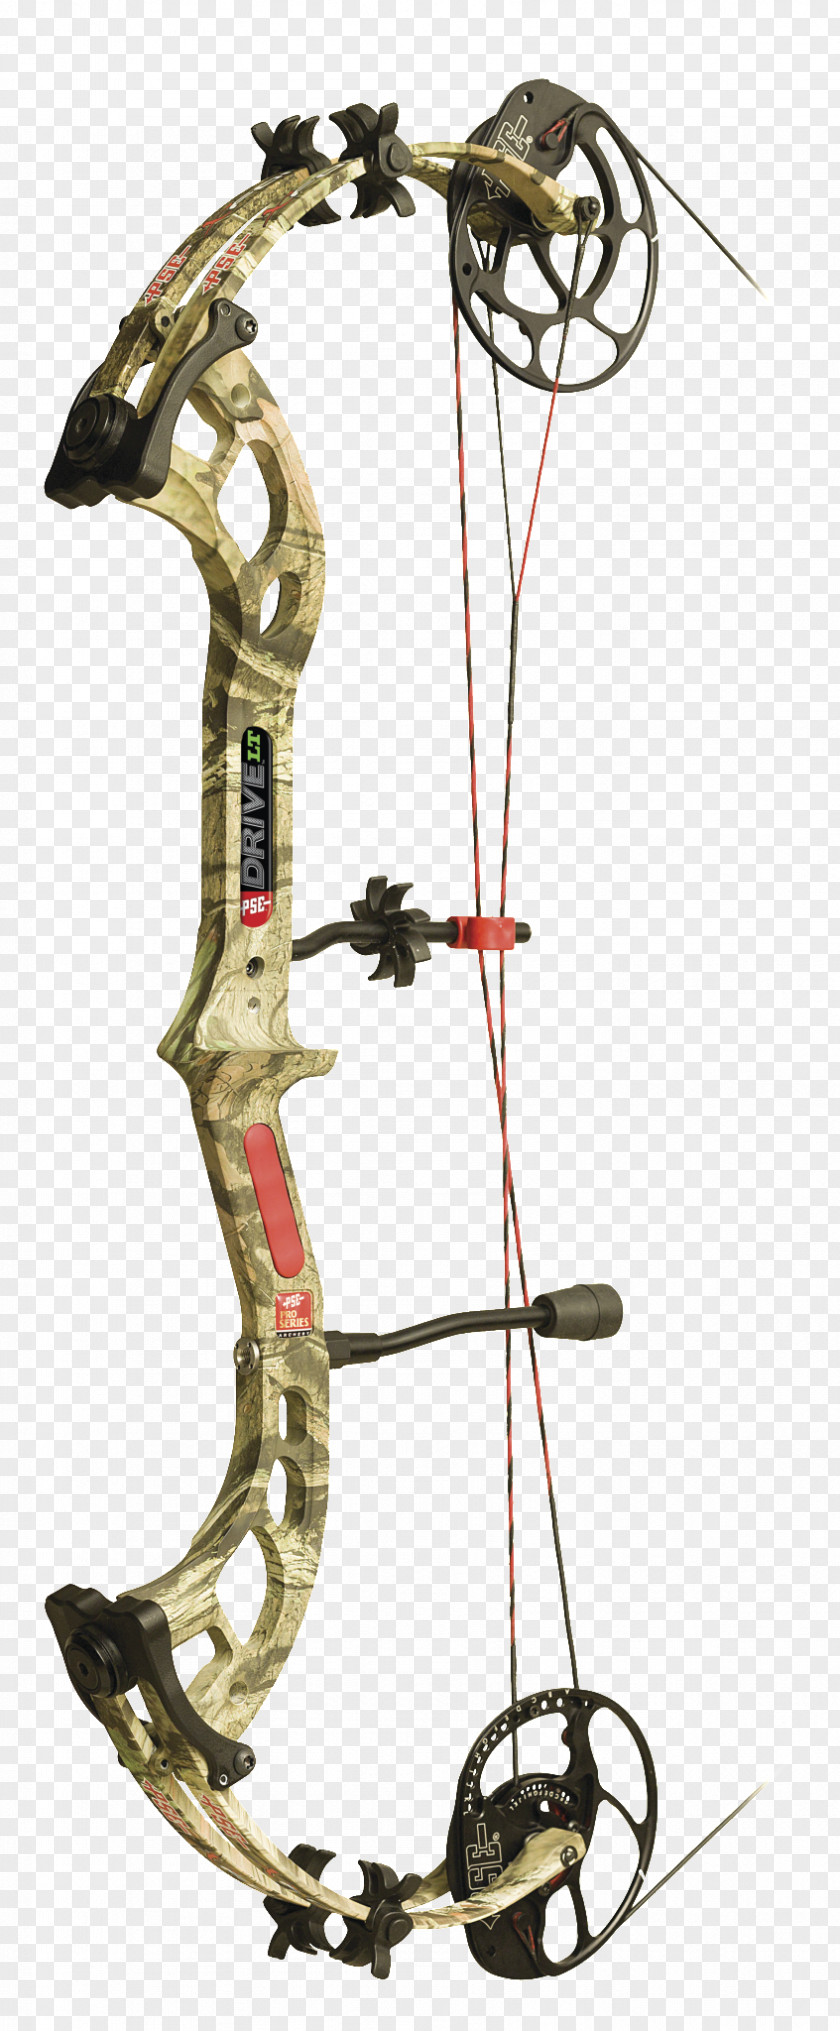 Archery PSE Bow And Arrow Compound Bows Crossbow PNG